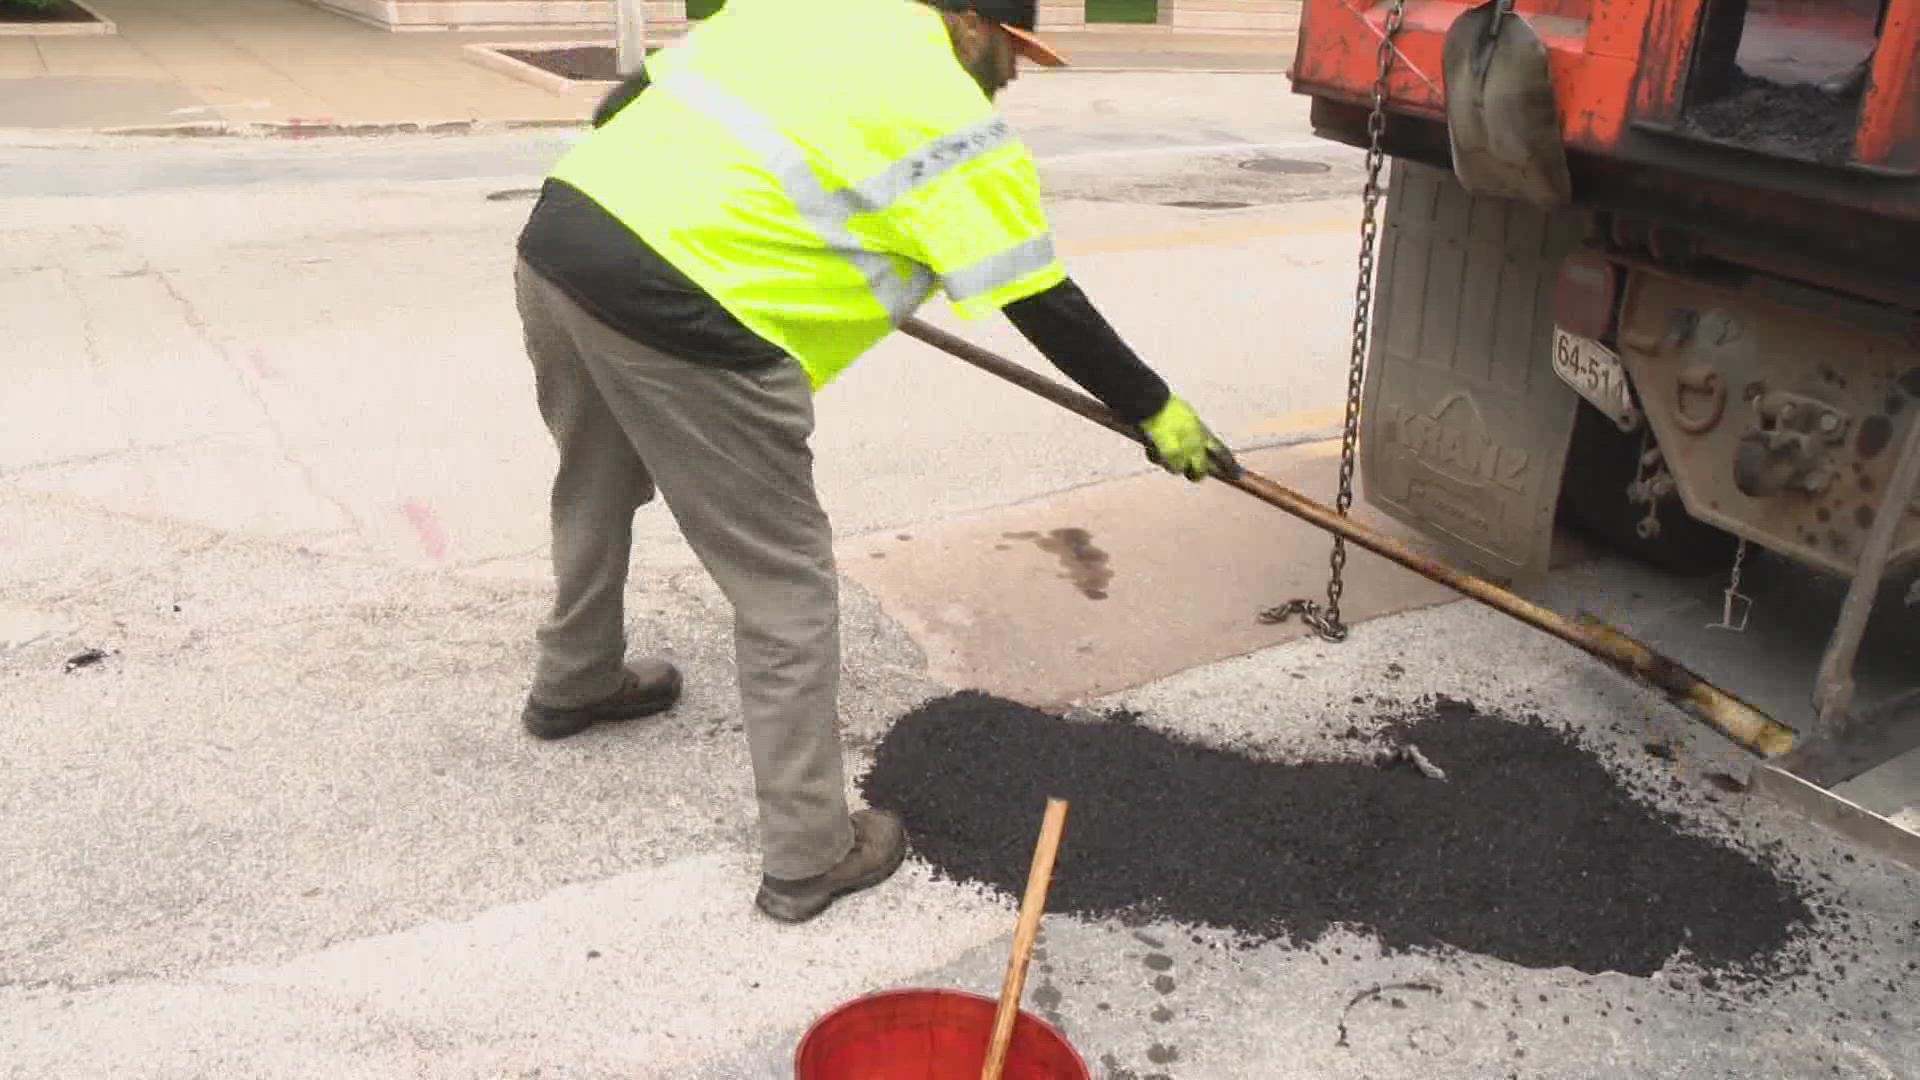 During the winter, road construction can be a pain. But, thanks to warmer weather, work is settling down for repair crews.